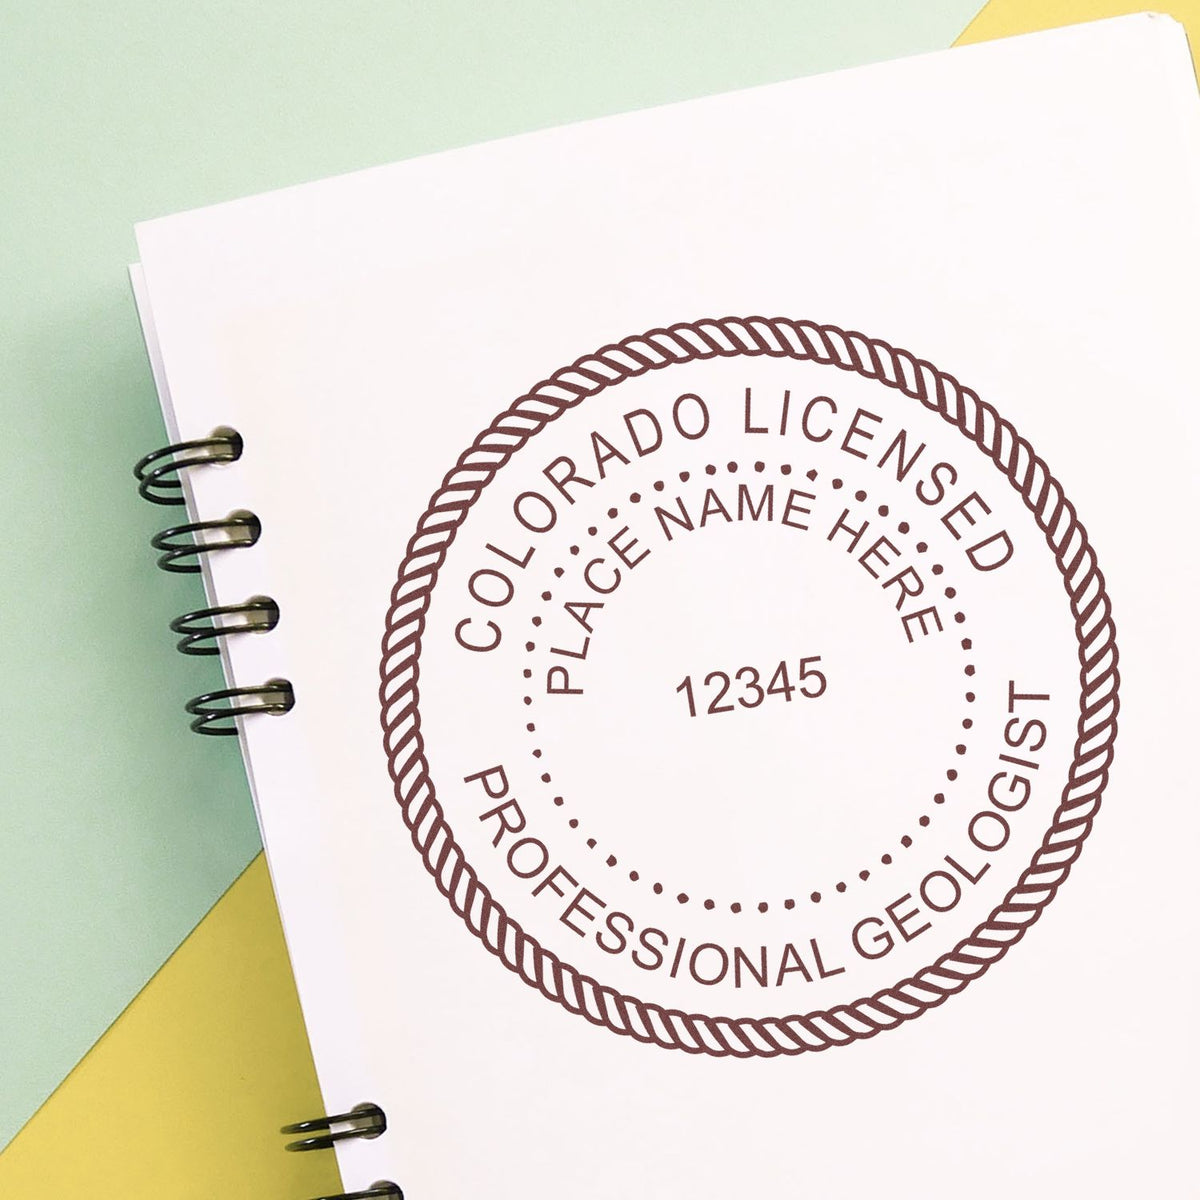 The Self-Inking Colorado Geologist Stamp stamp impression comes to life with a crisp, detailed image stamped on paper - showcasing true professional quality.